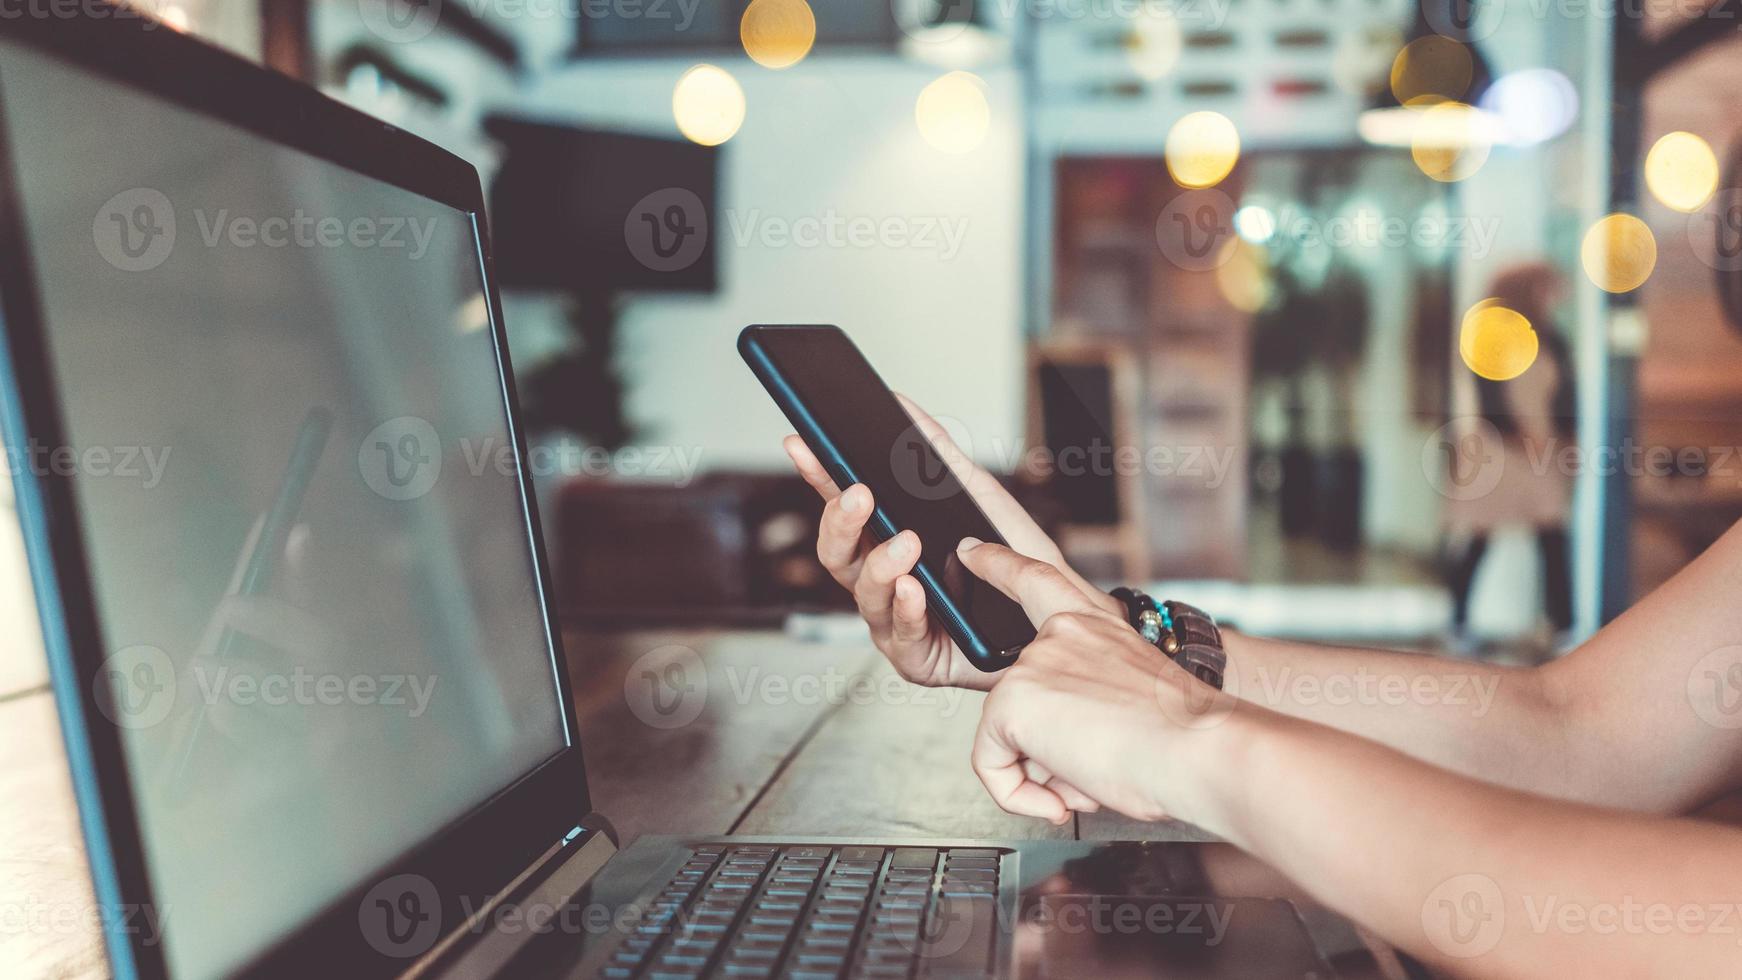 Woman use technology devices smartphone and laptop to work or study do connect communication business photo